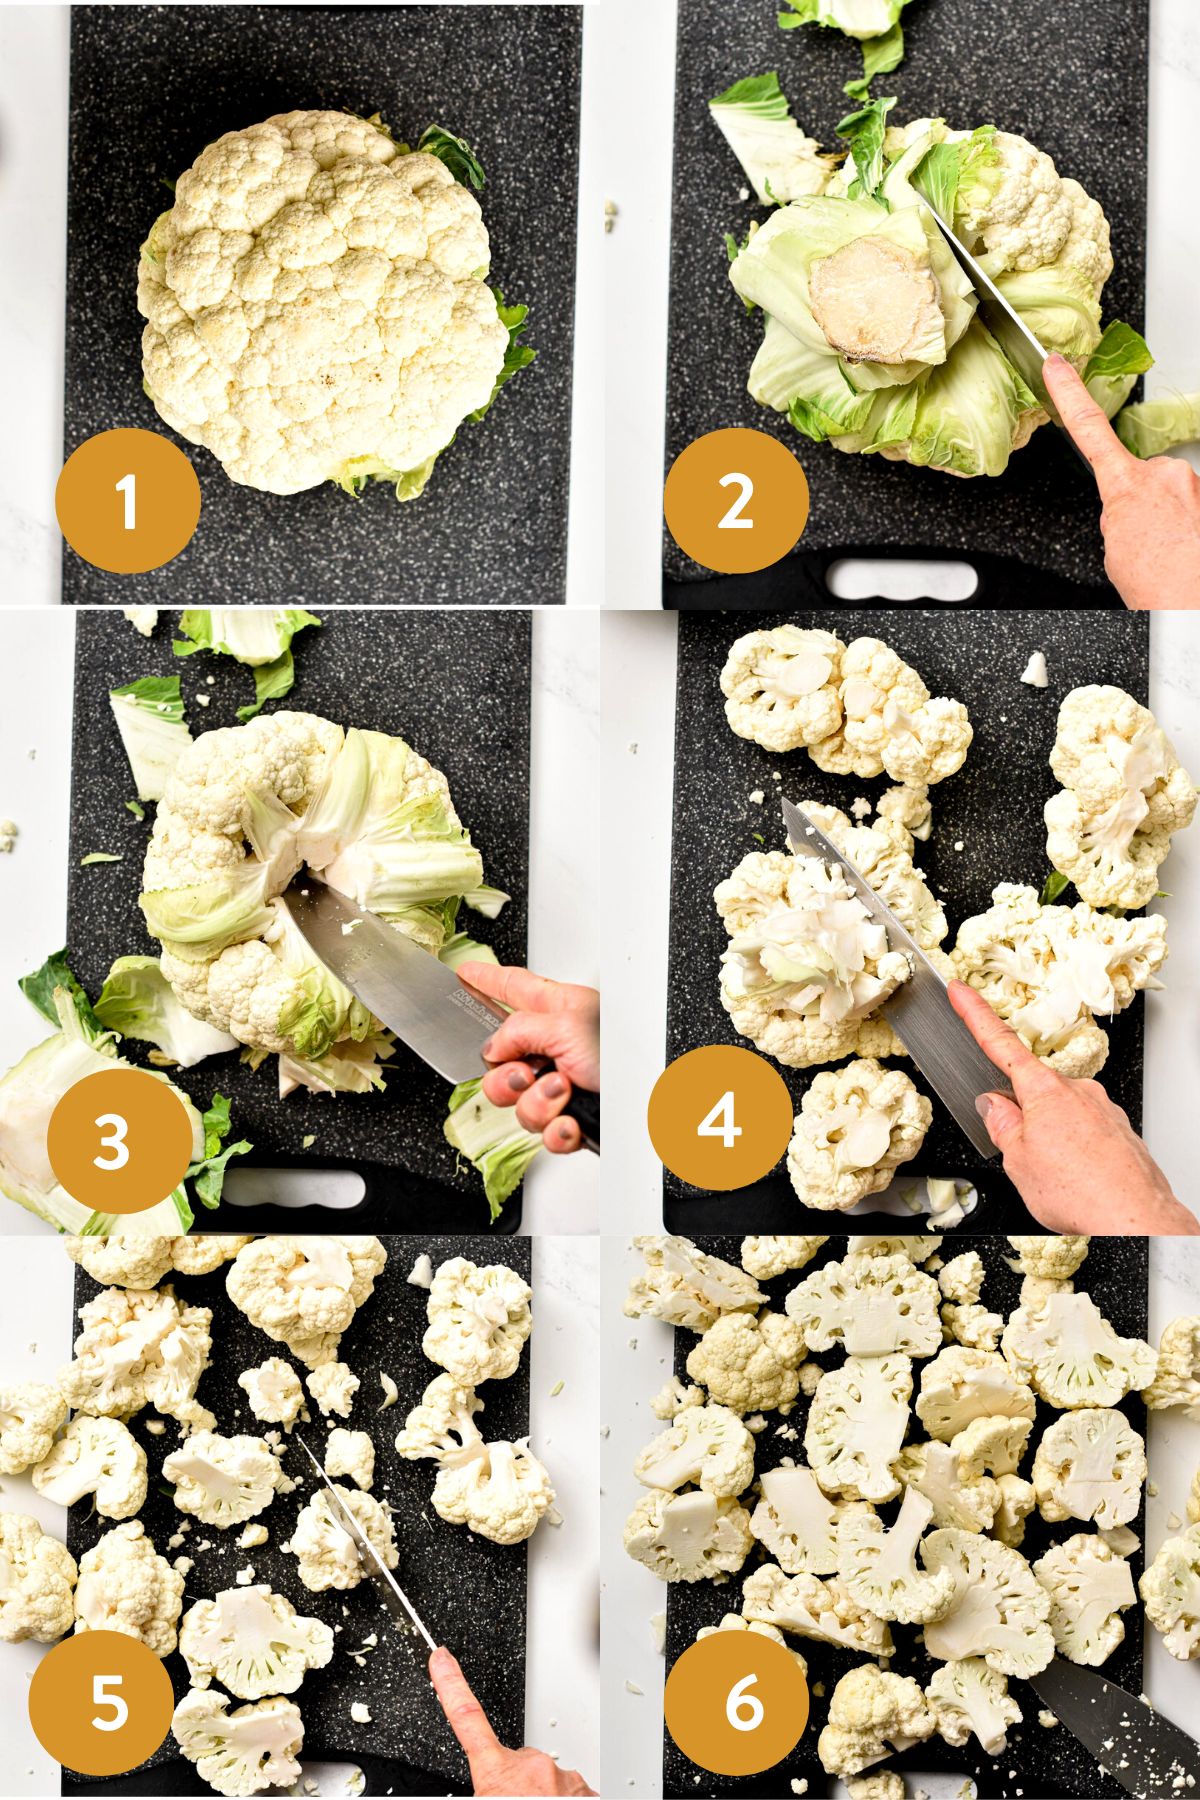 Step-by-step instructions on How to Cut Cauliflower